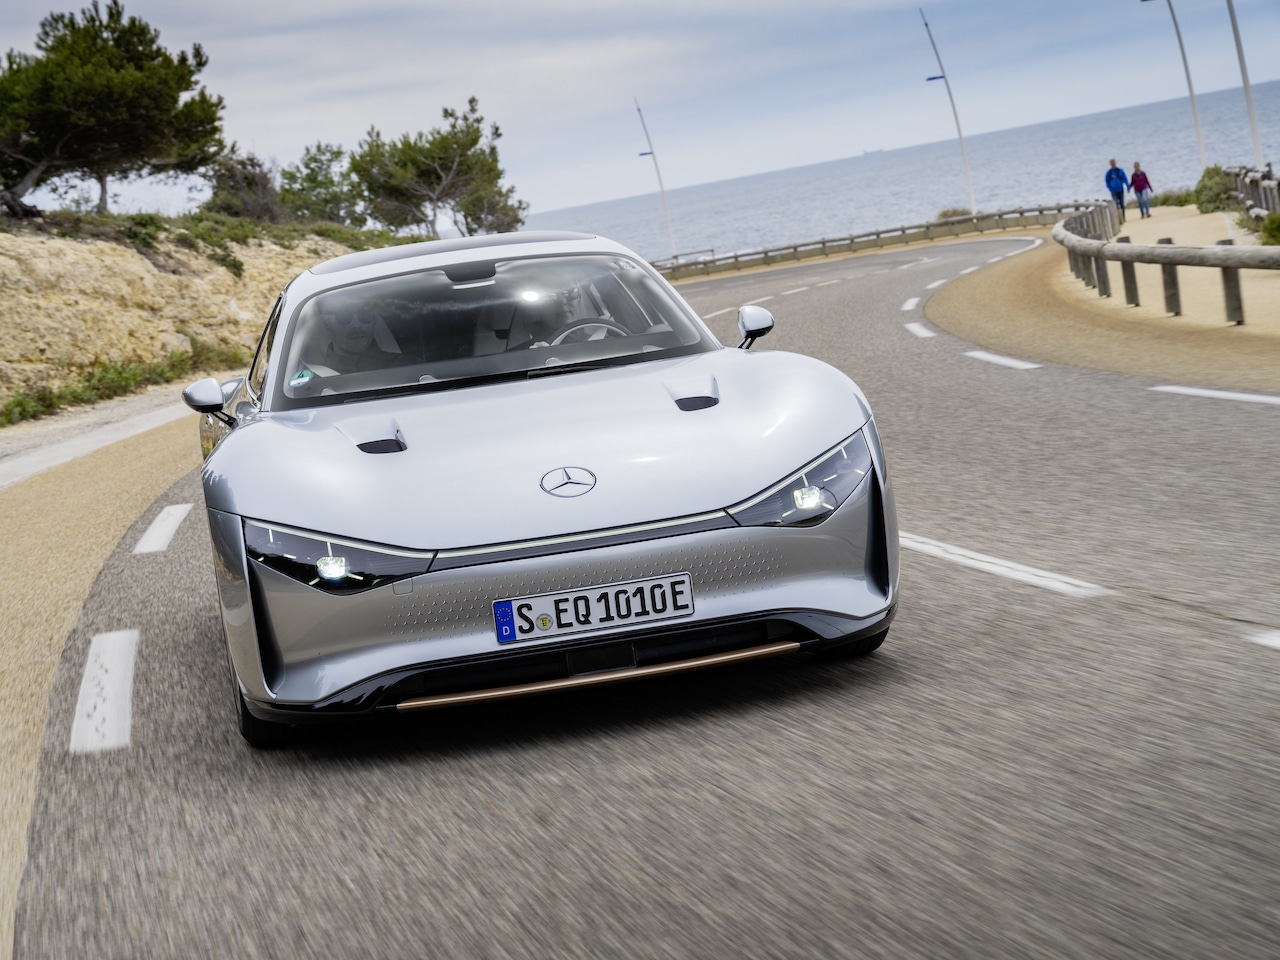 Mercedes-Benz VISION EQXX demonstrates its world-beating efficiency in real world driving – over 1,000 km on one battery charge and average consumption of 8.7 kWh/100 km